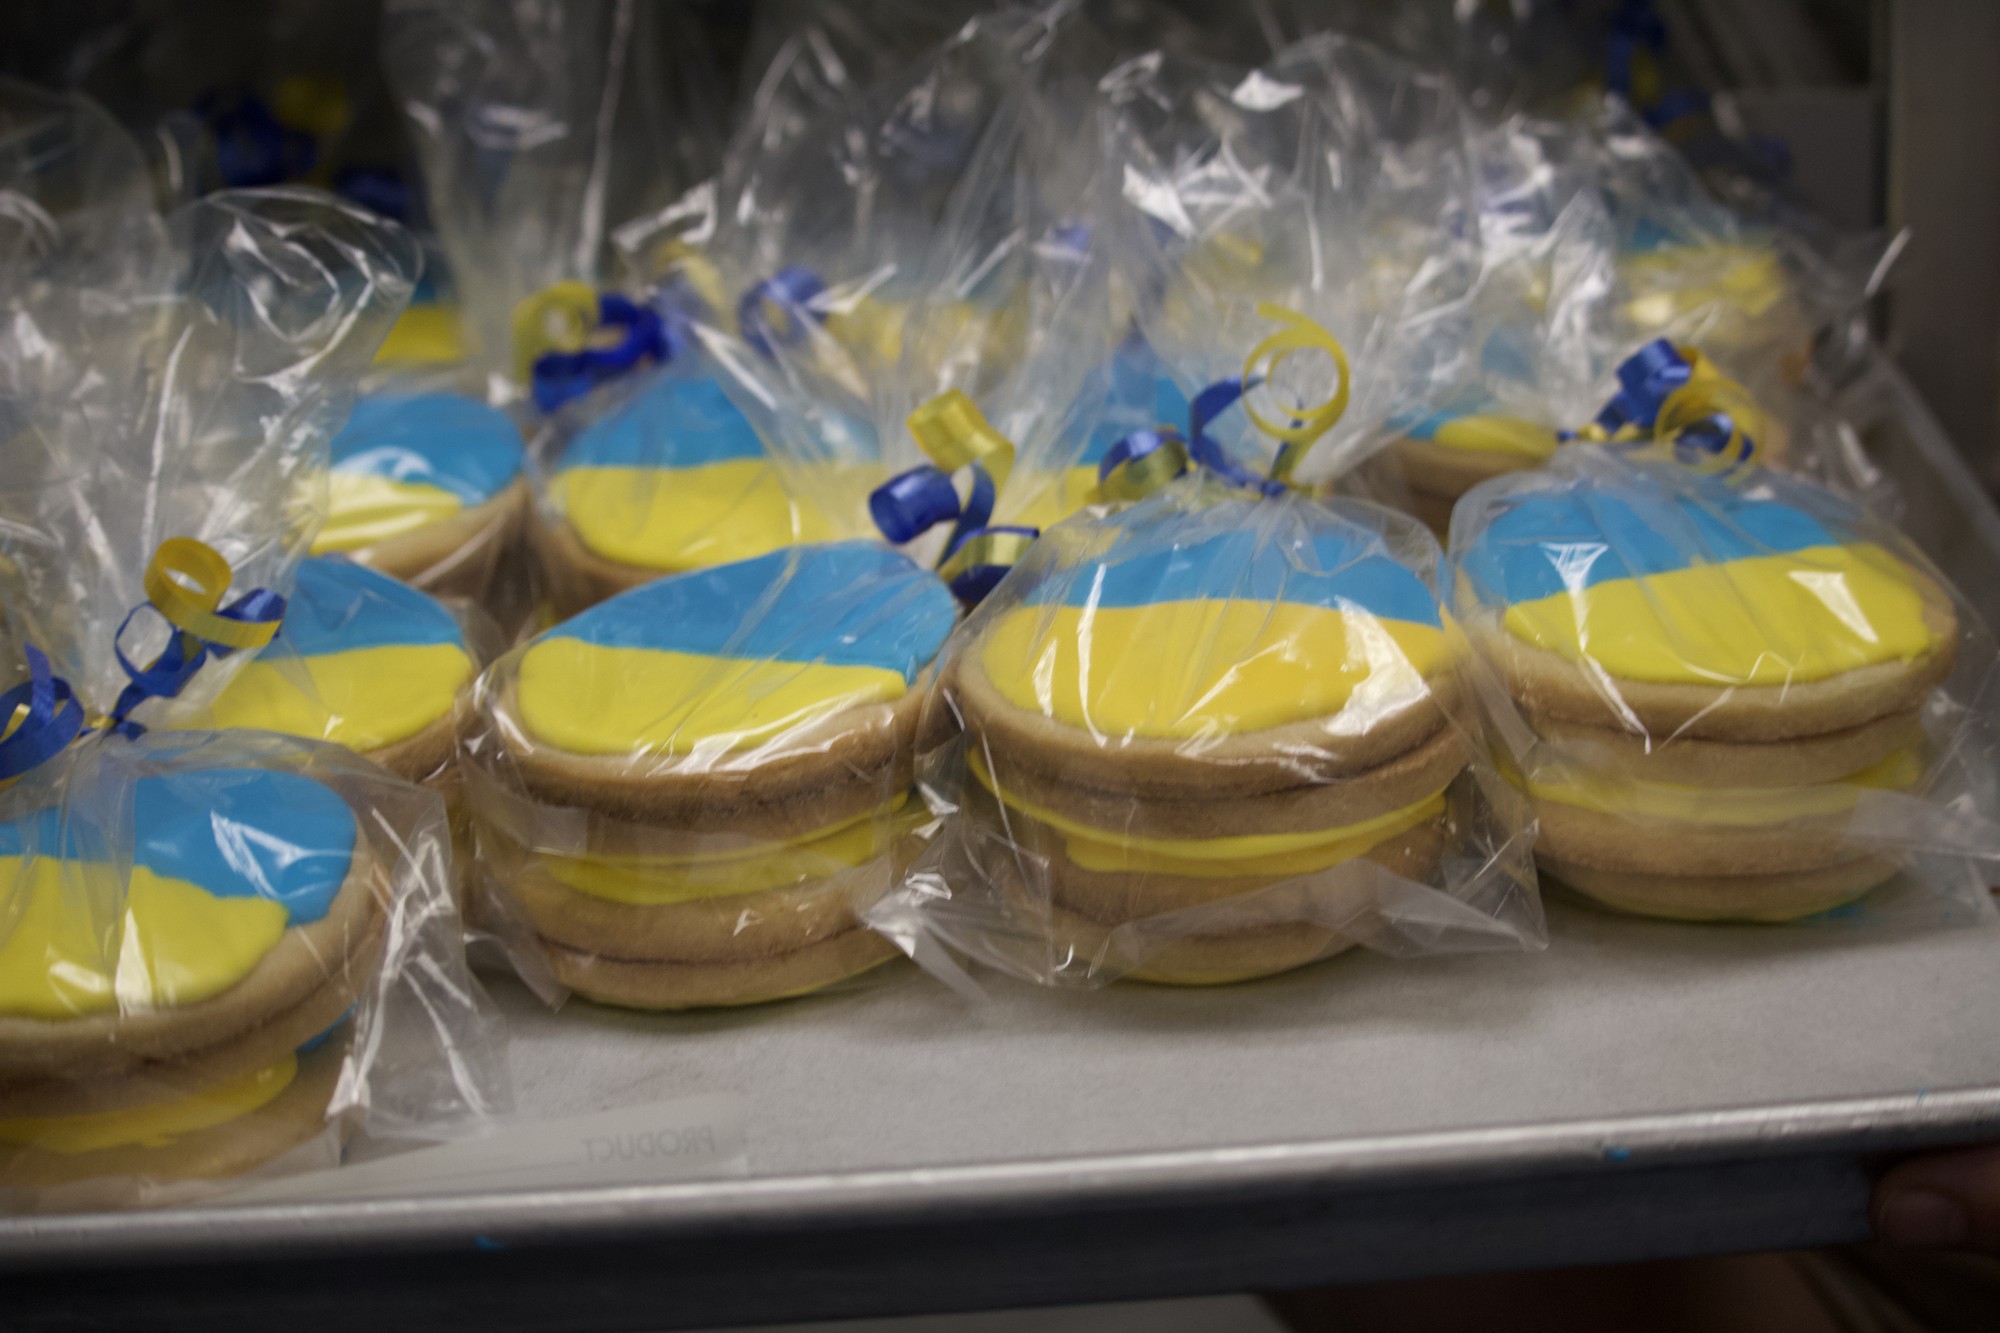 These Ukrainian cookies were featured as a part of the Ukrainian sampler hosted by Restaurant international.